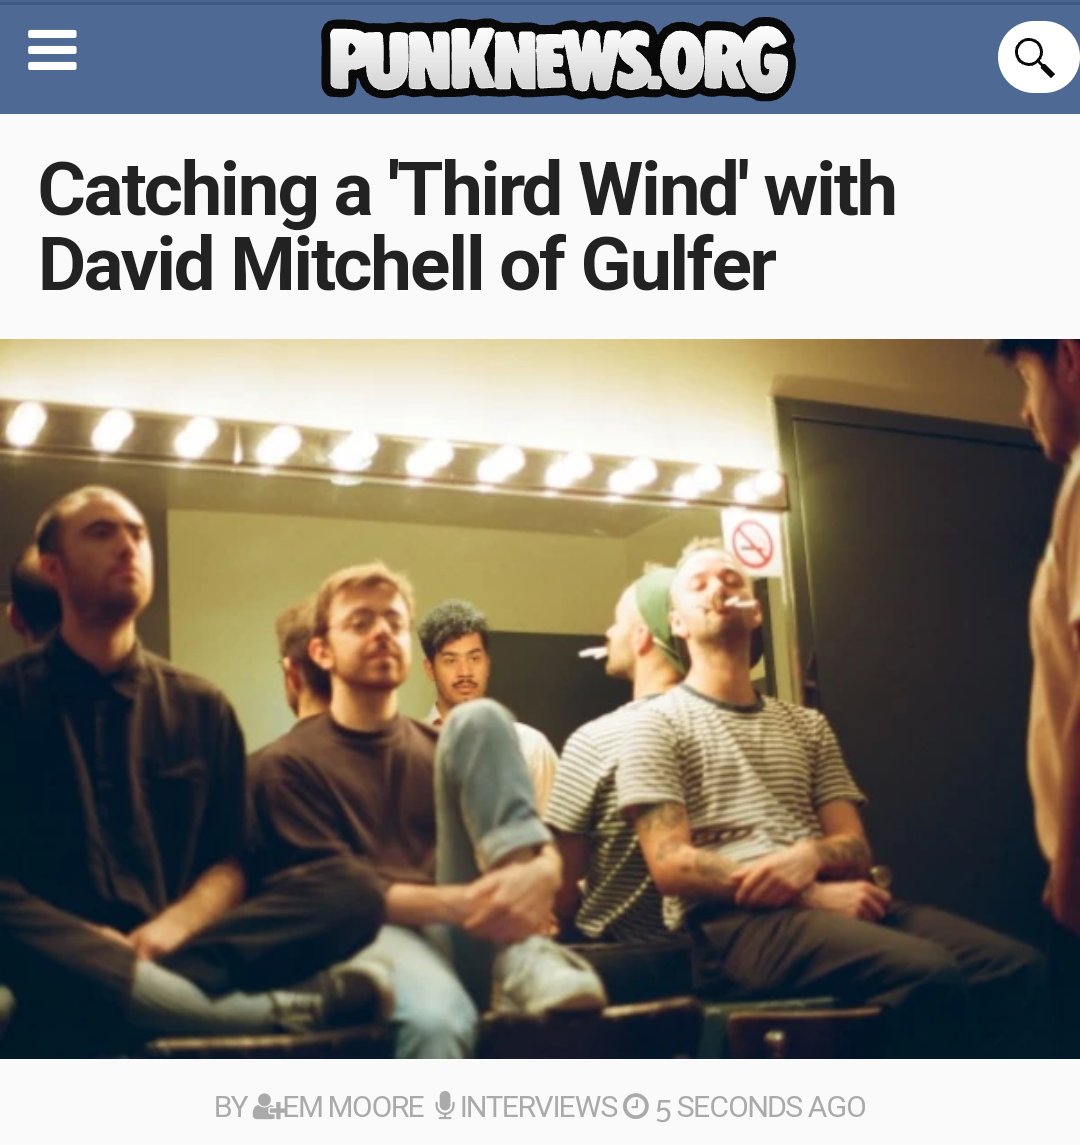 My interview with David Mitchell of @gulfergulfer is now up on Punknews!! We talked about the band's excellent upcoming album 'Third Wind' (out Feb 28 via @topshelfrecords), listening to the Universe, dealing with burnout, and so much more!! Read at the link in my bio!!